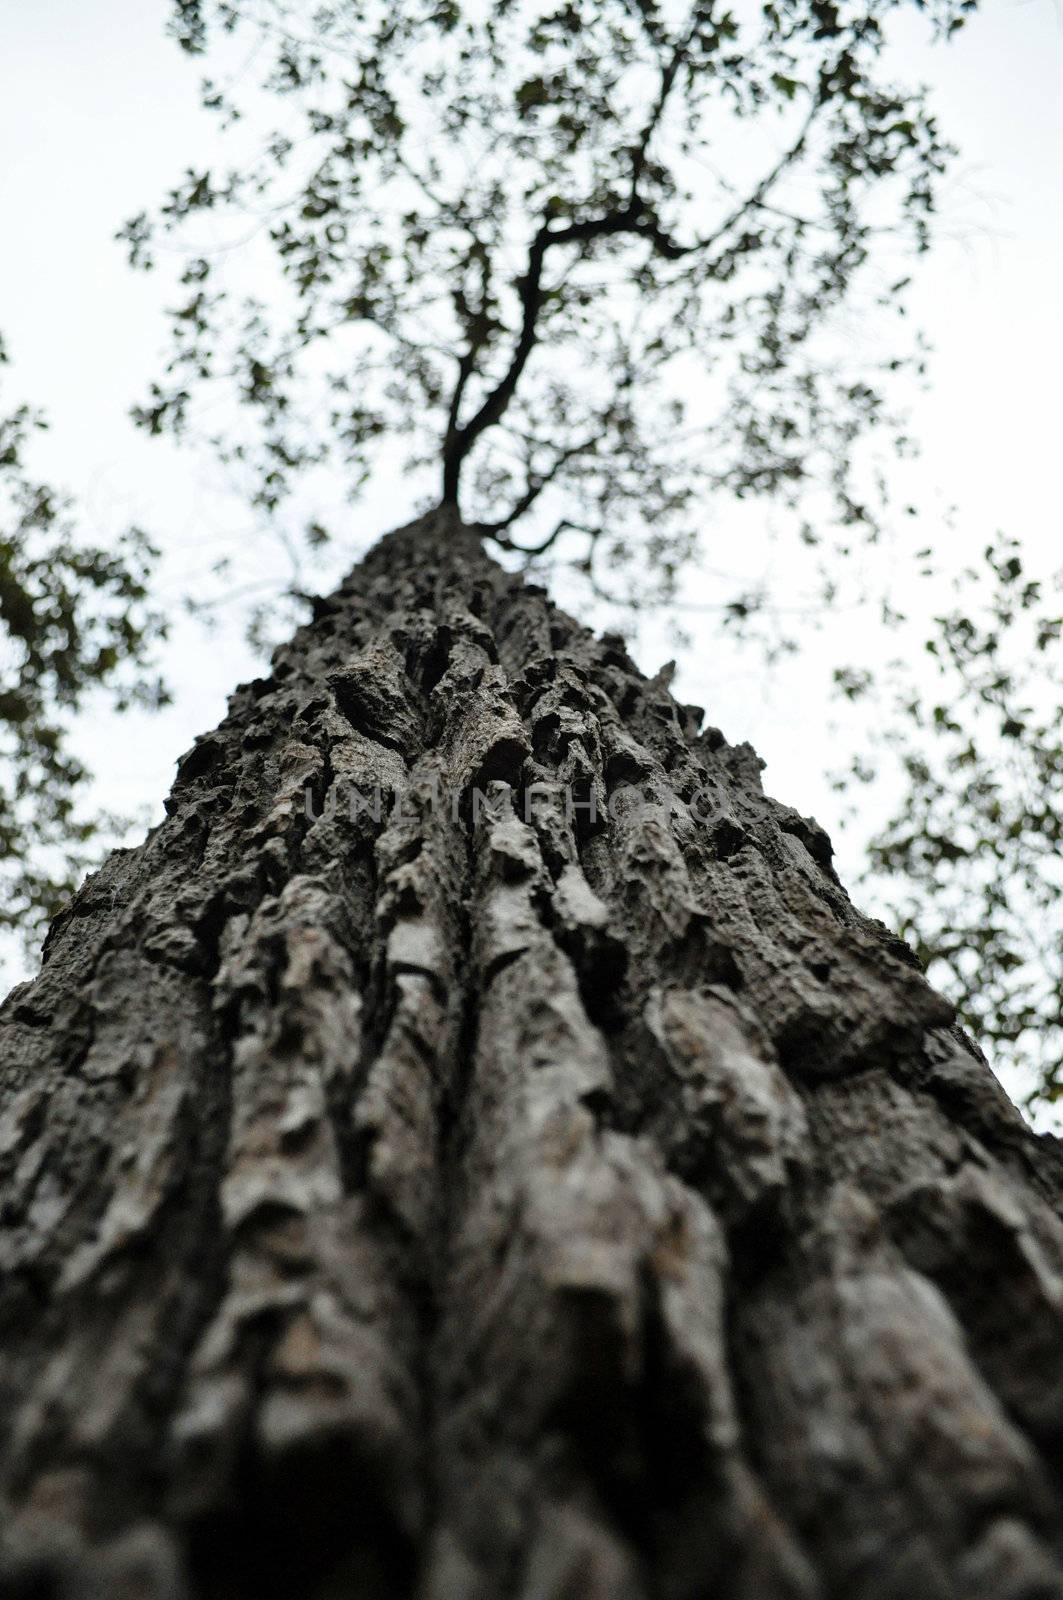 Bark is the outermost layers of stems and roots of woody plants. 